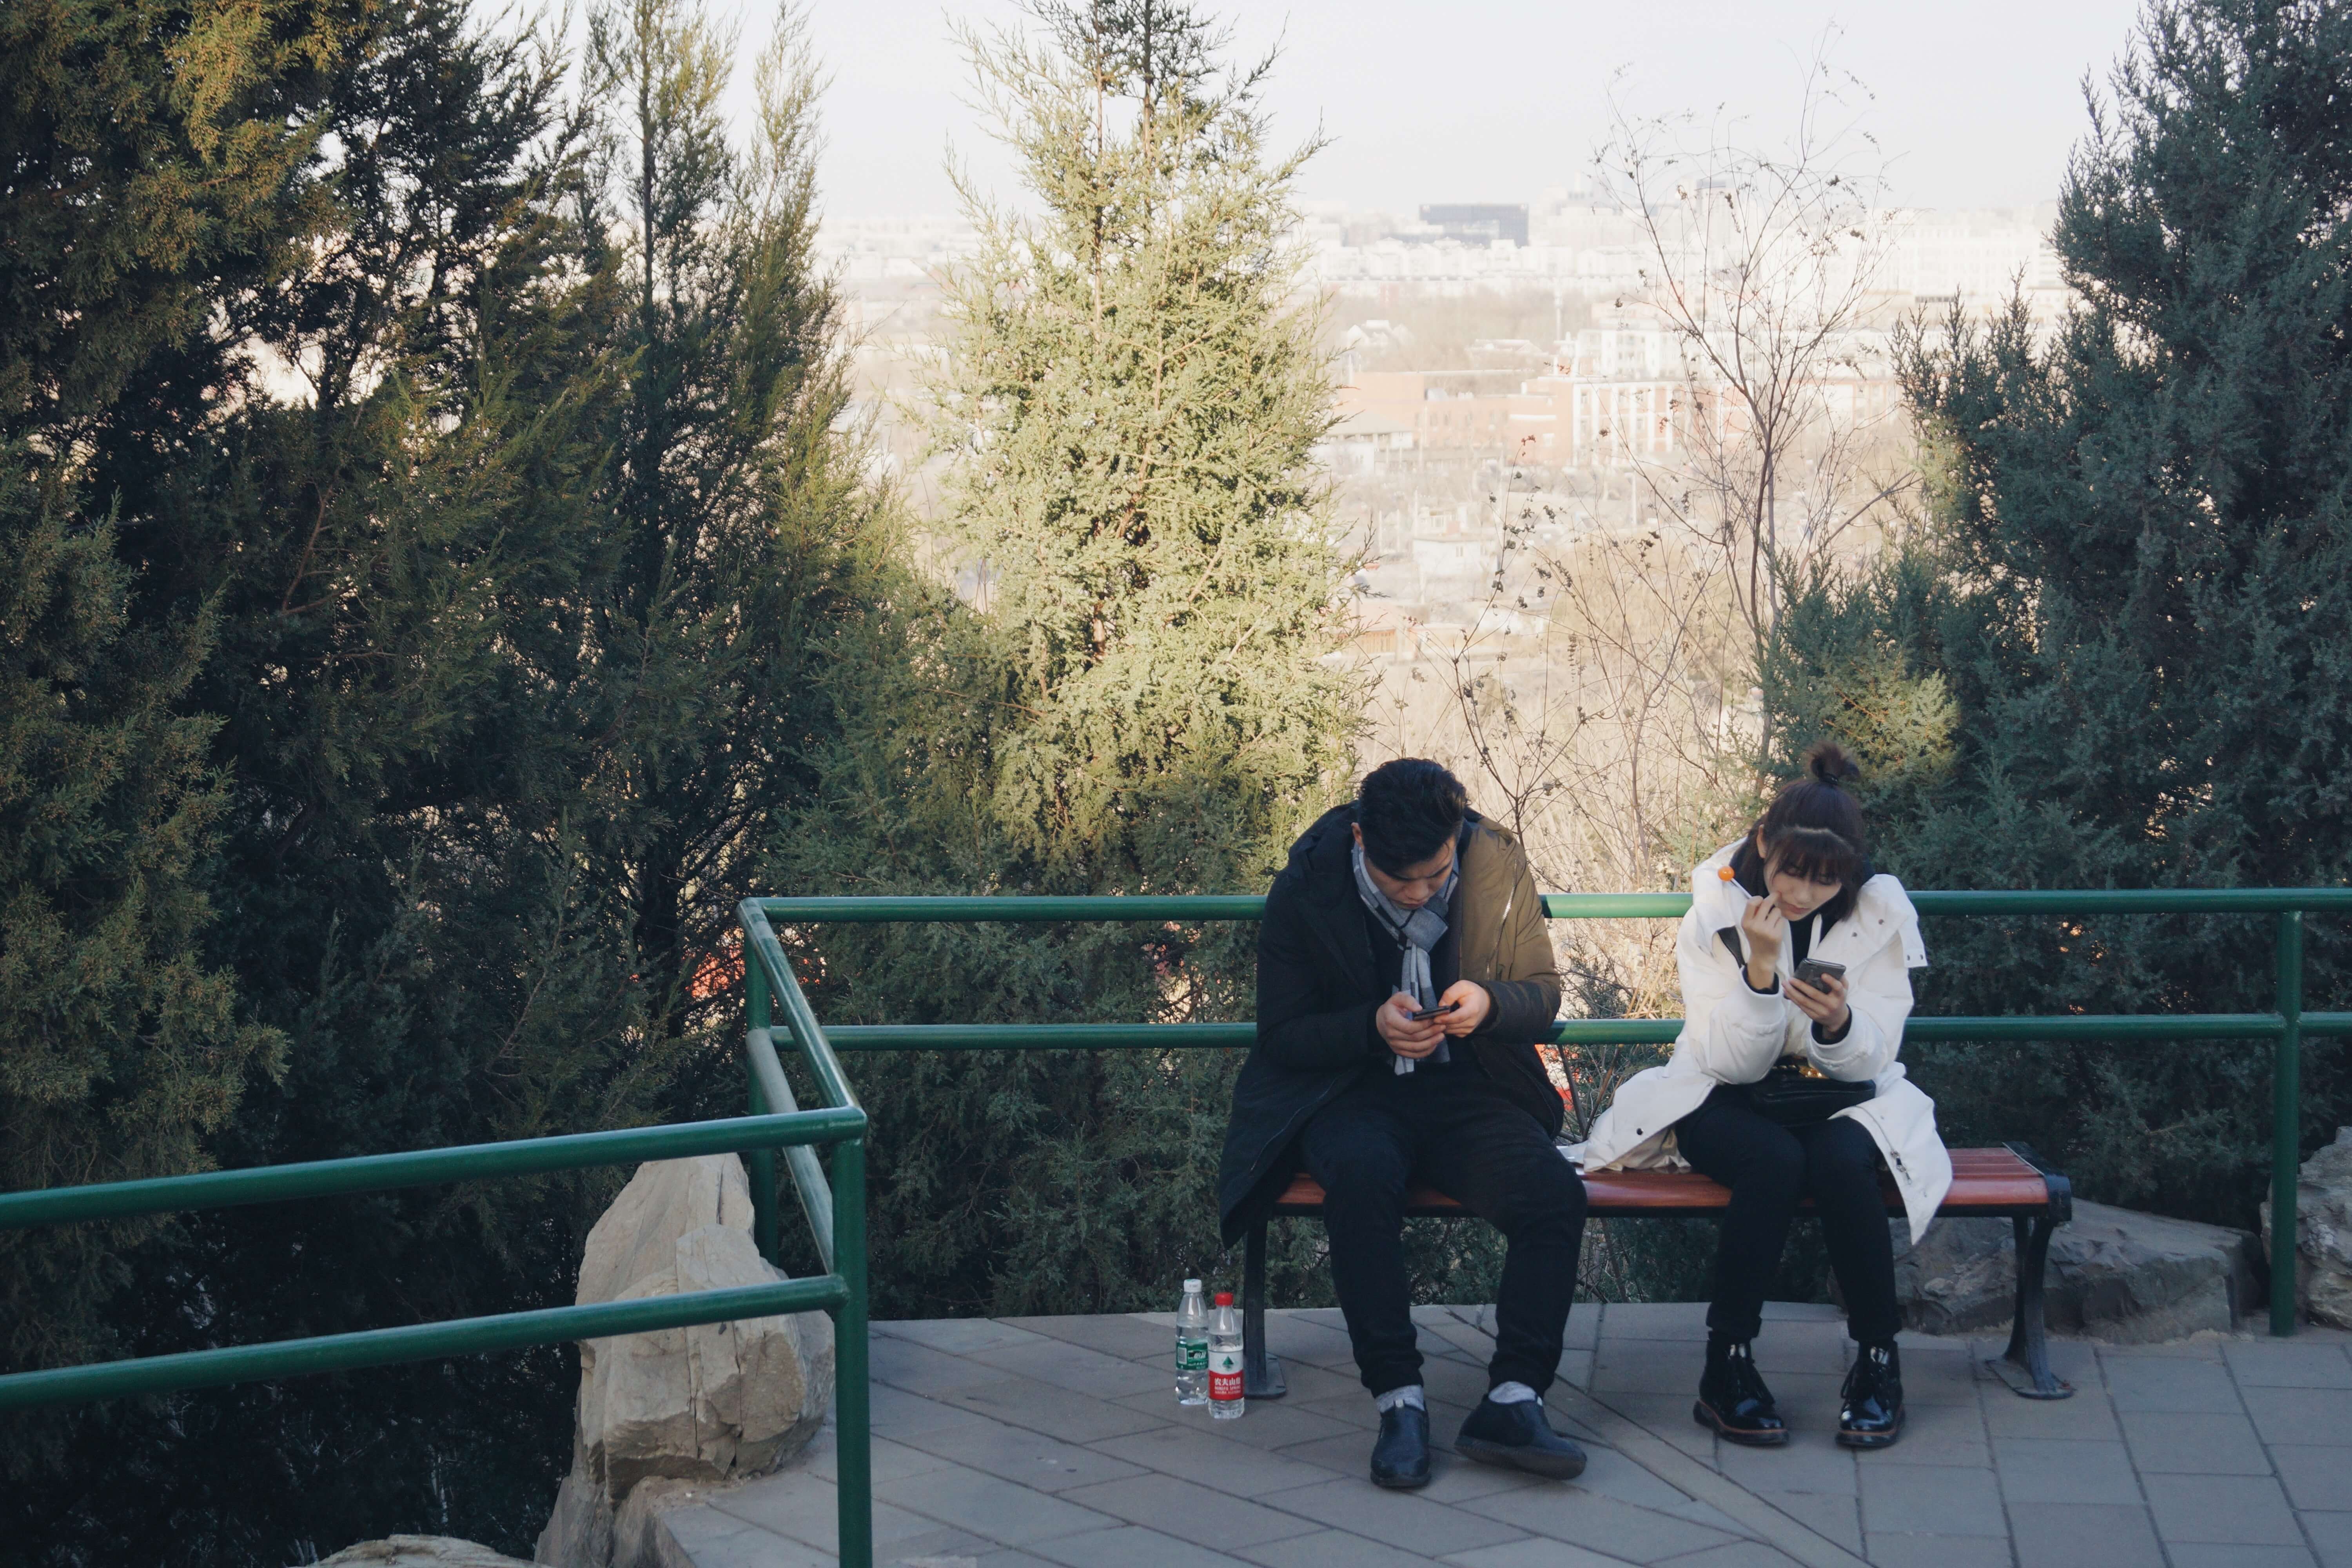 two people on a bench texting